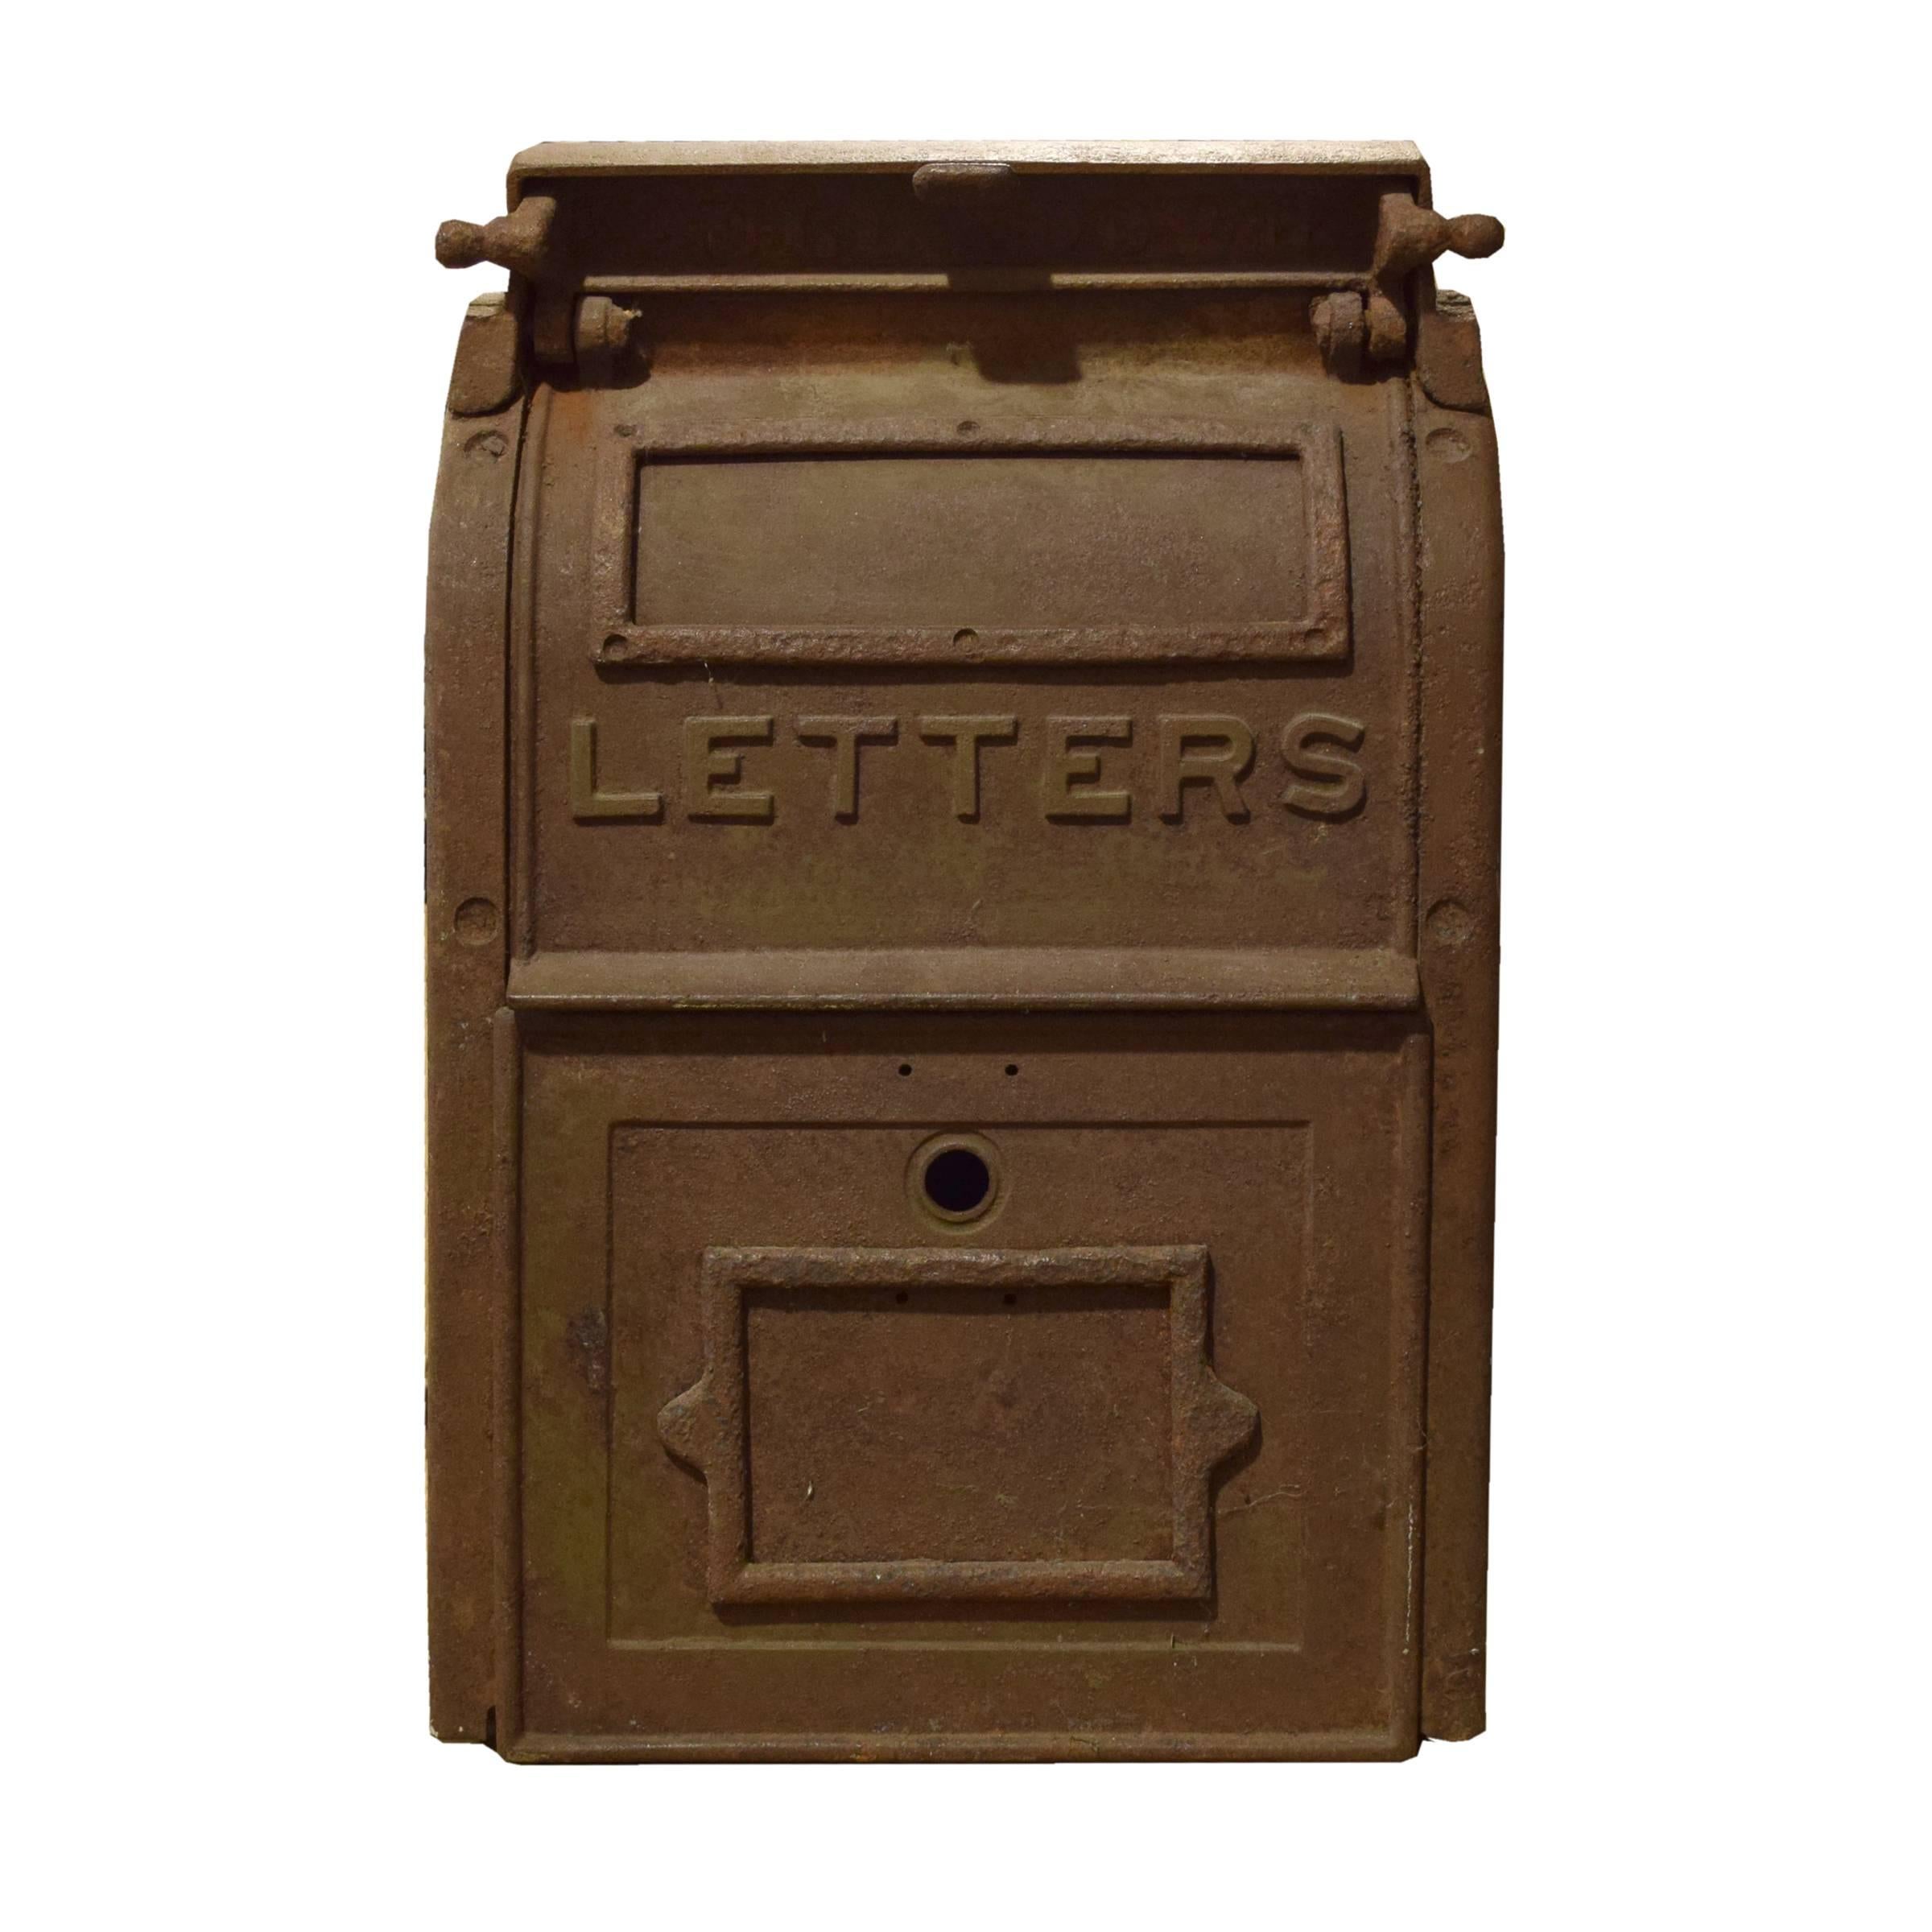 A cast iron U.S. mailbox manufactured by the Hebert Manufacturing Company, Franklin, NH, circa 1930, with functioning mail slot and retrieval door.